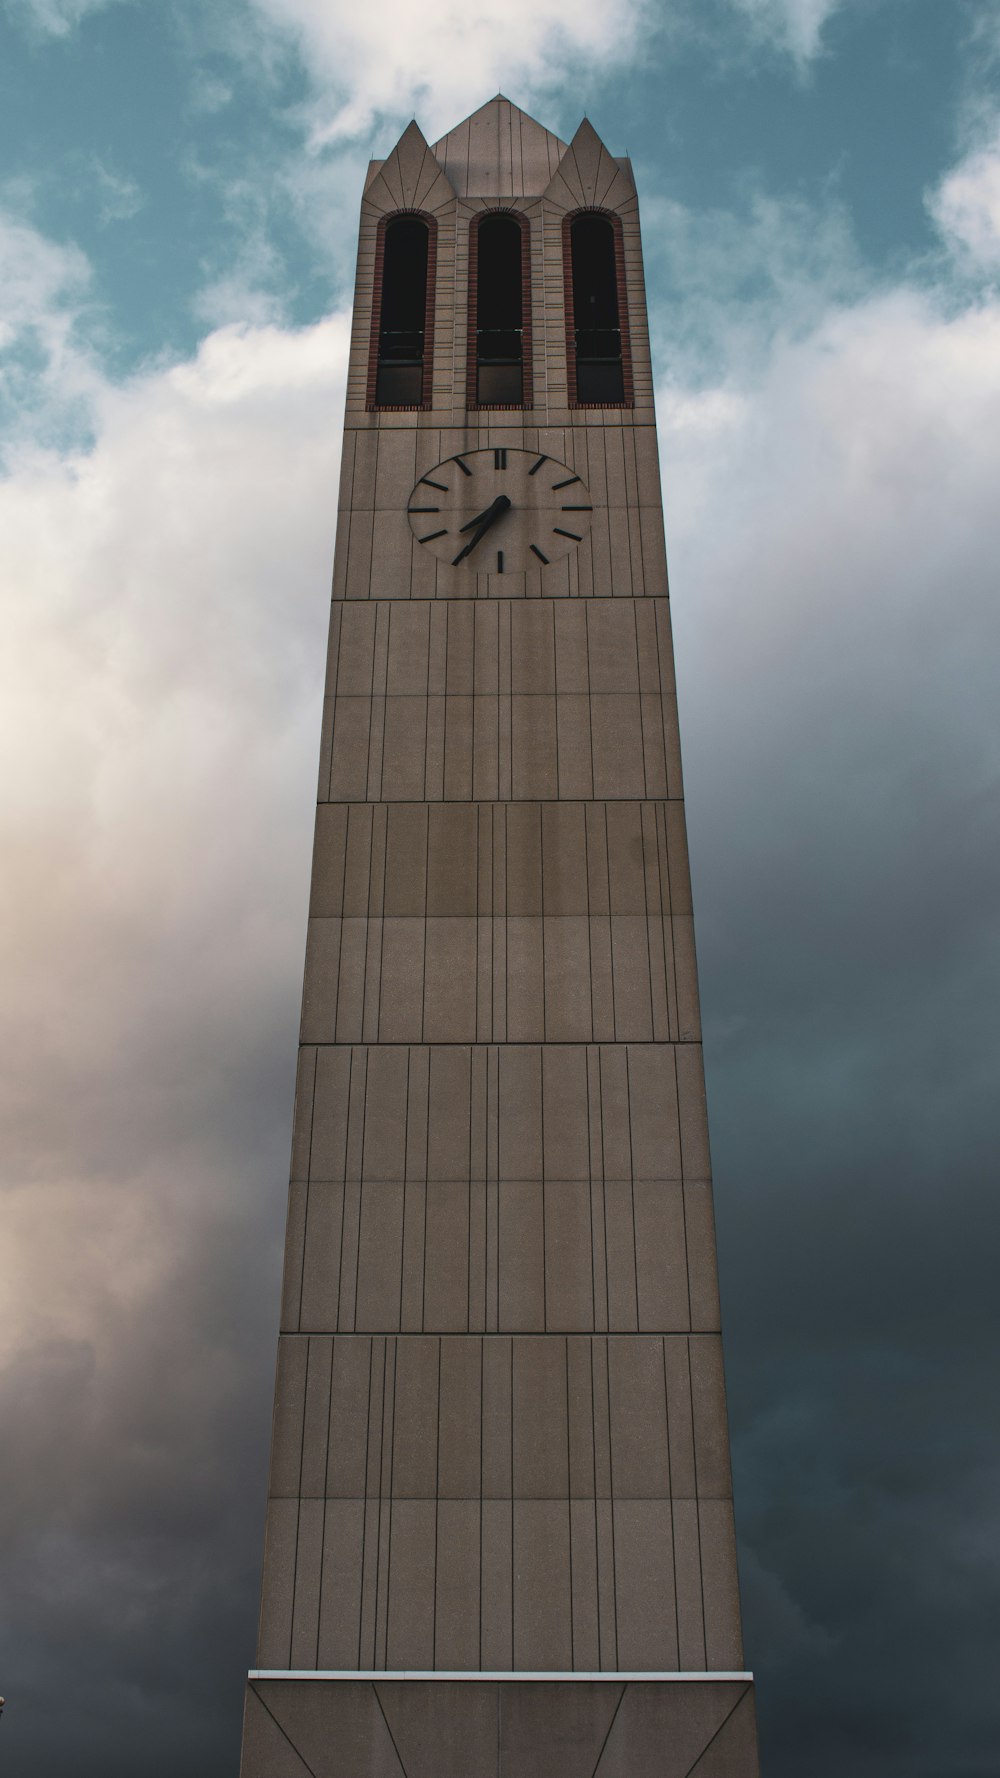 a tall clock tower sitting under a cloudy sky